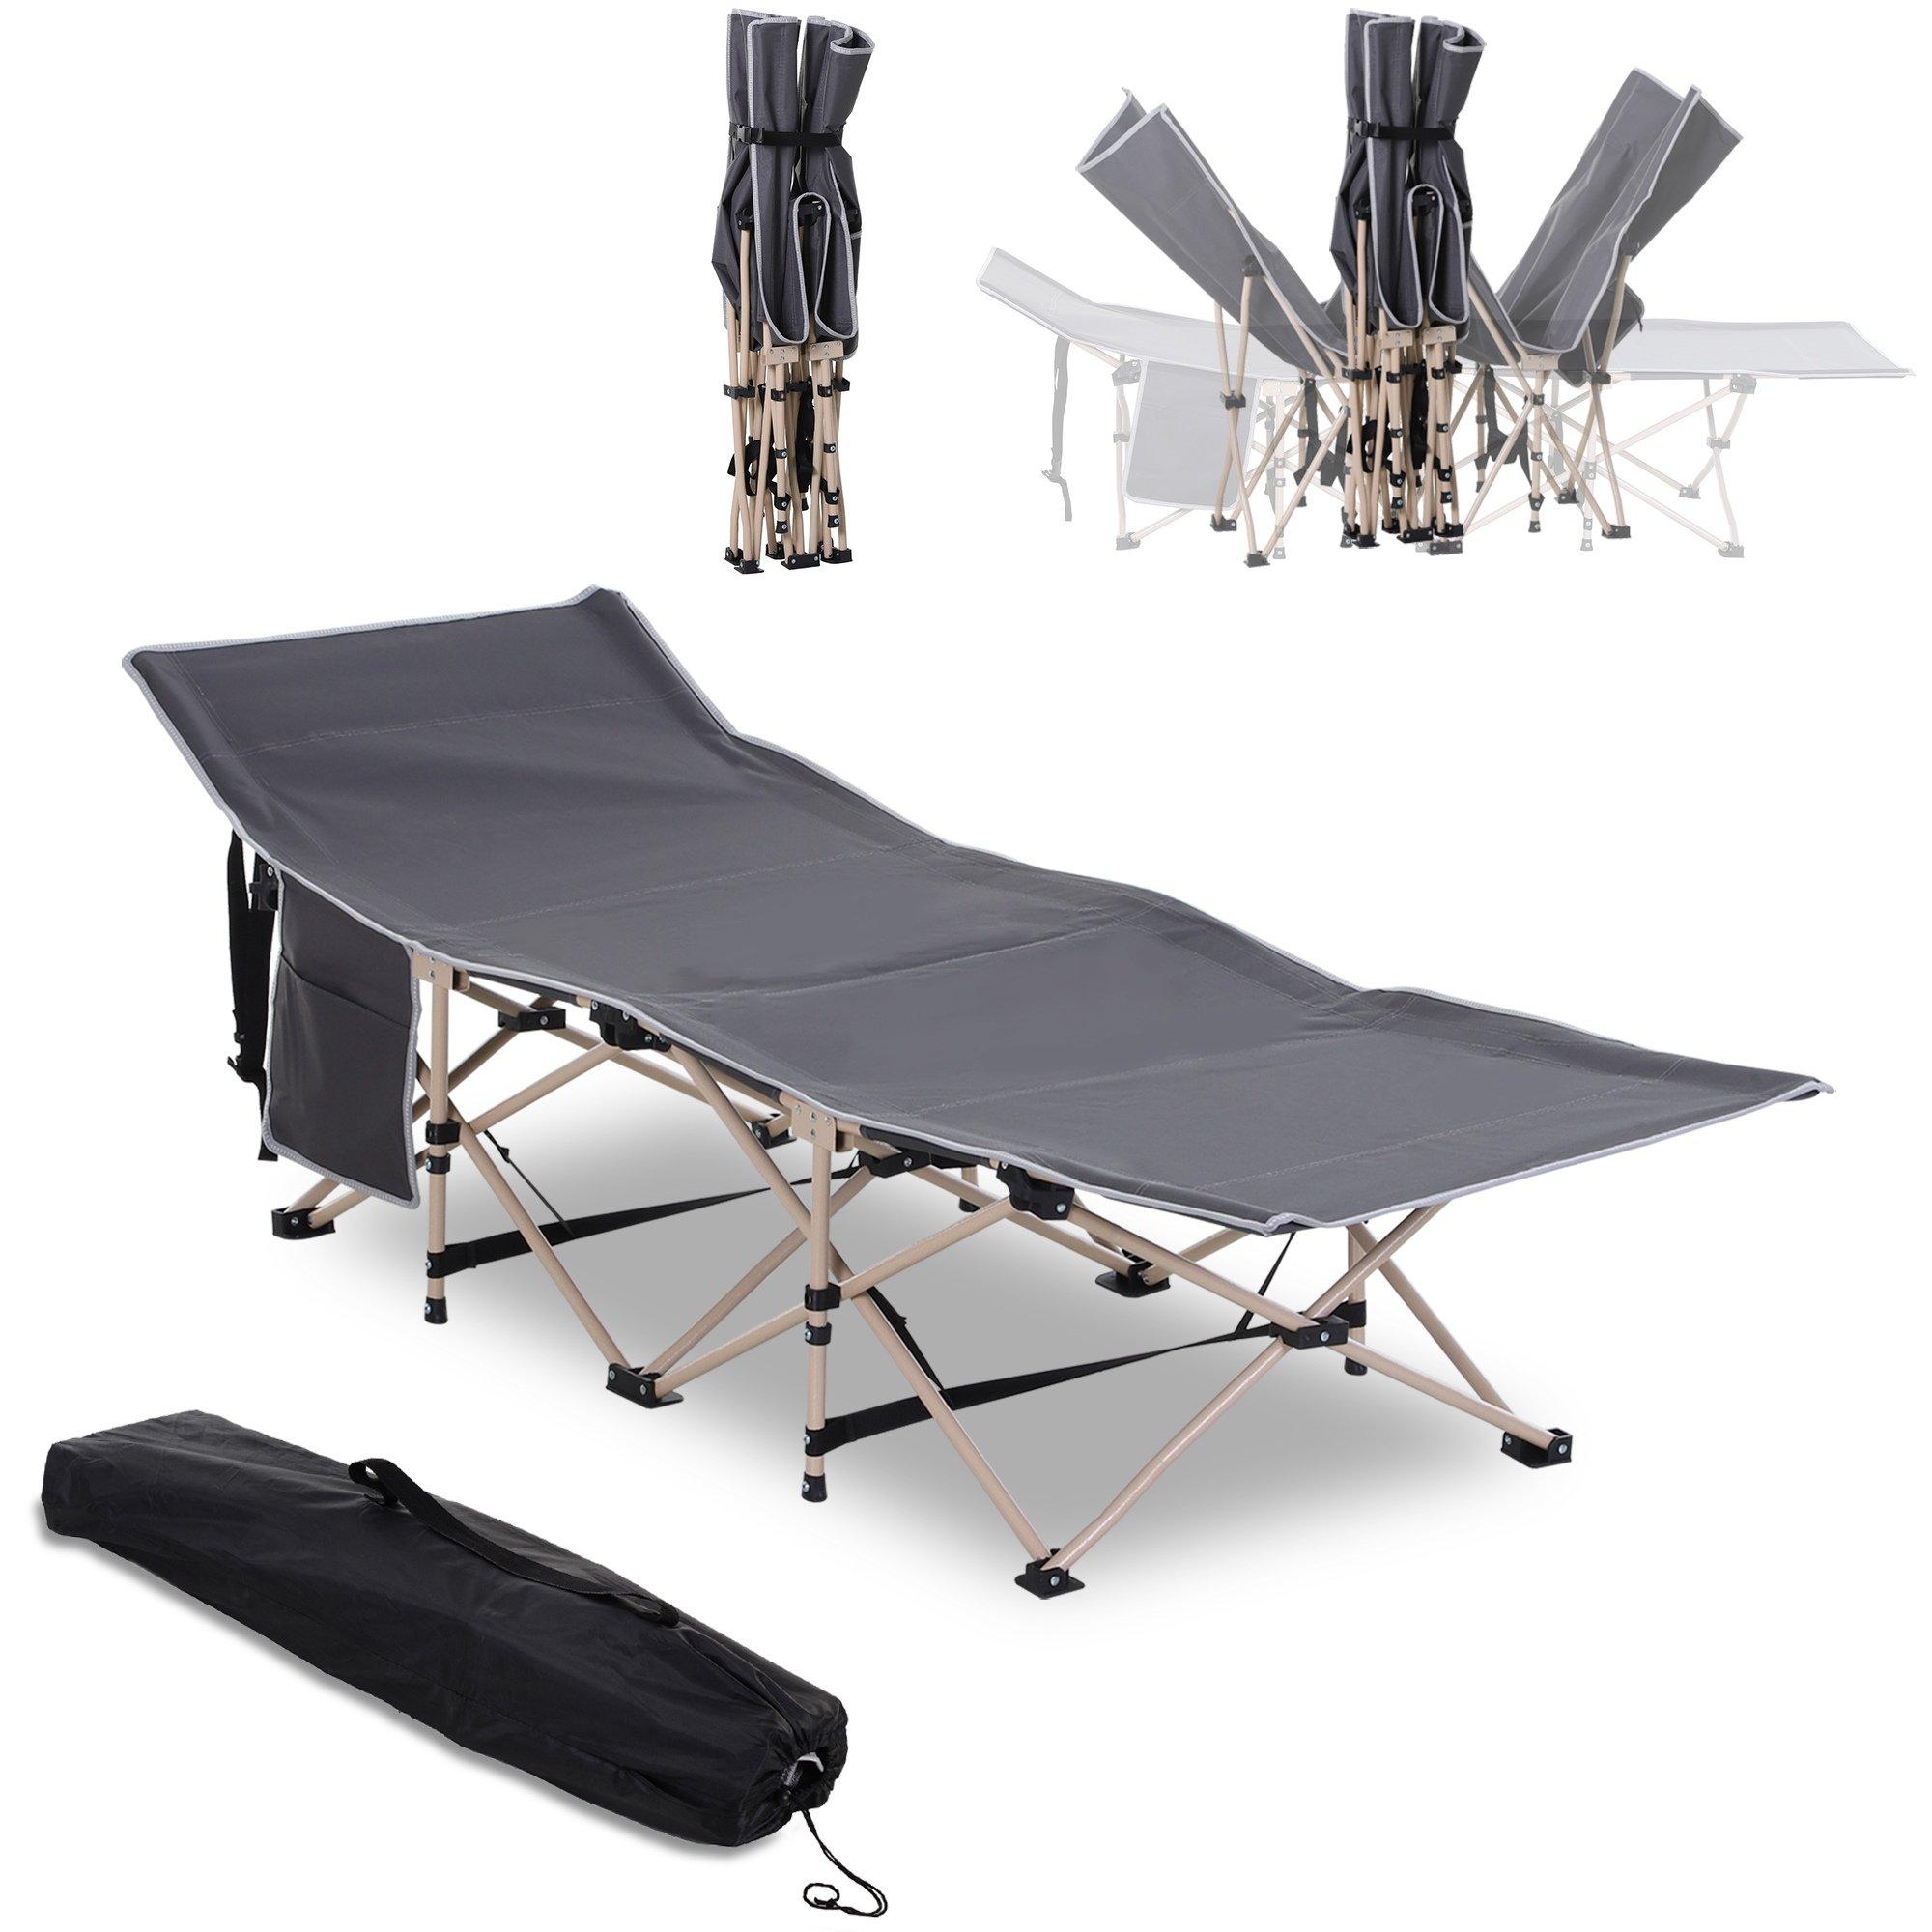 Single Person Folding Camping Cot Portable Camp Sleeping Bed with Carry Bag